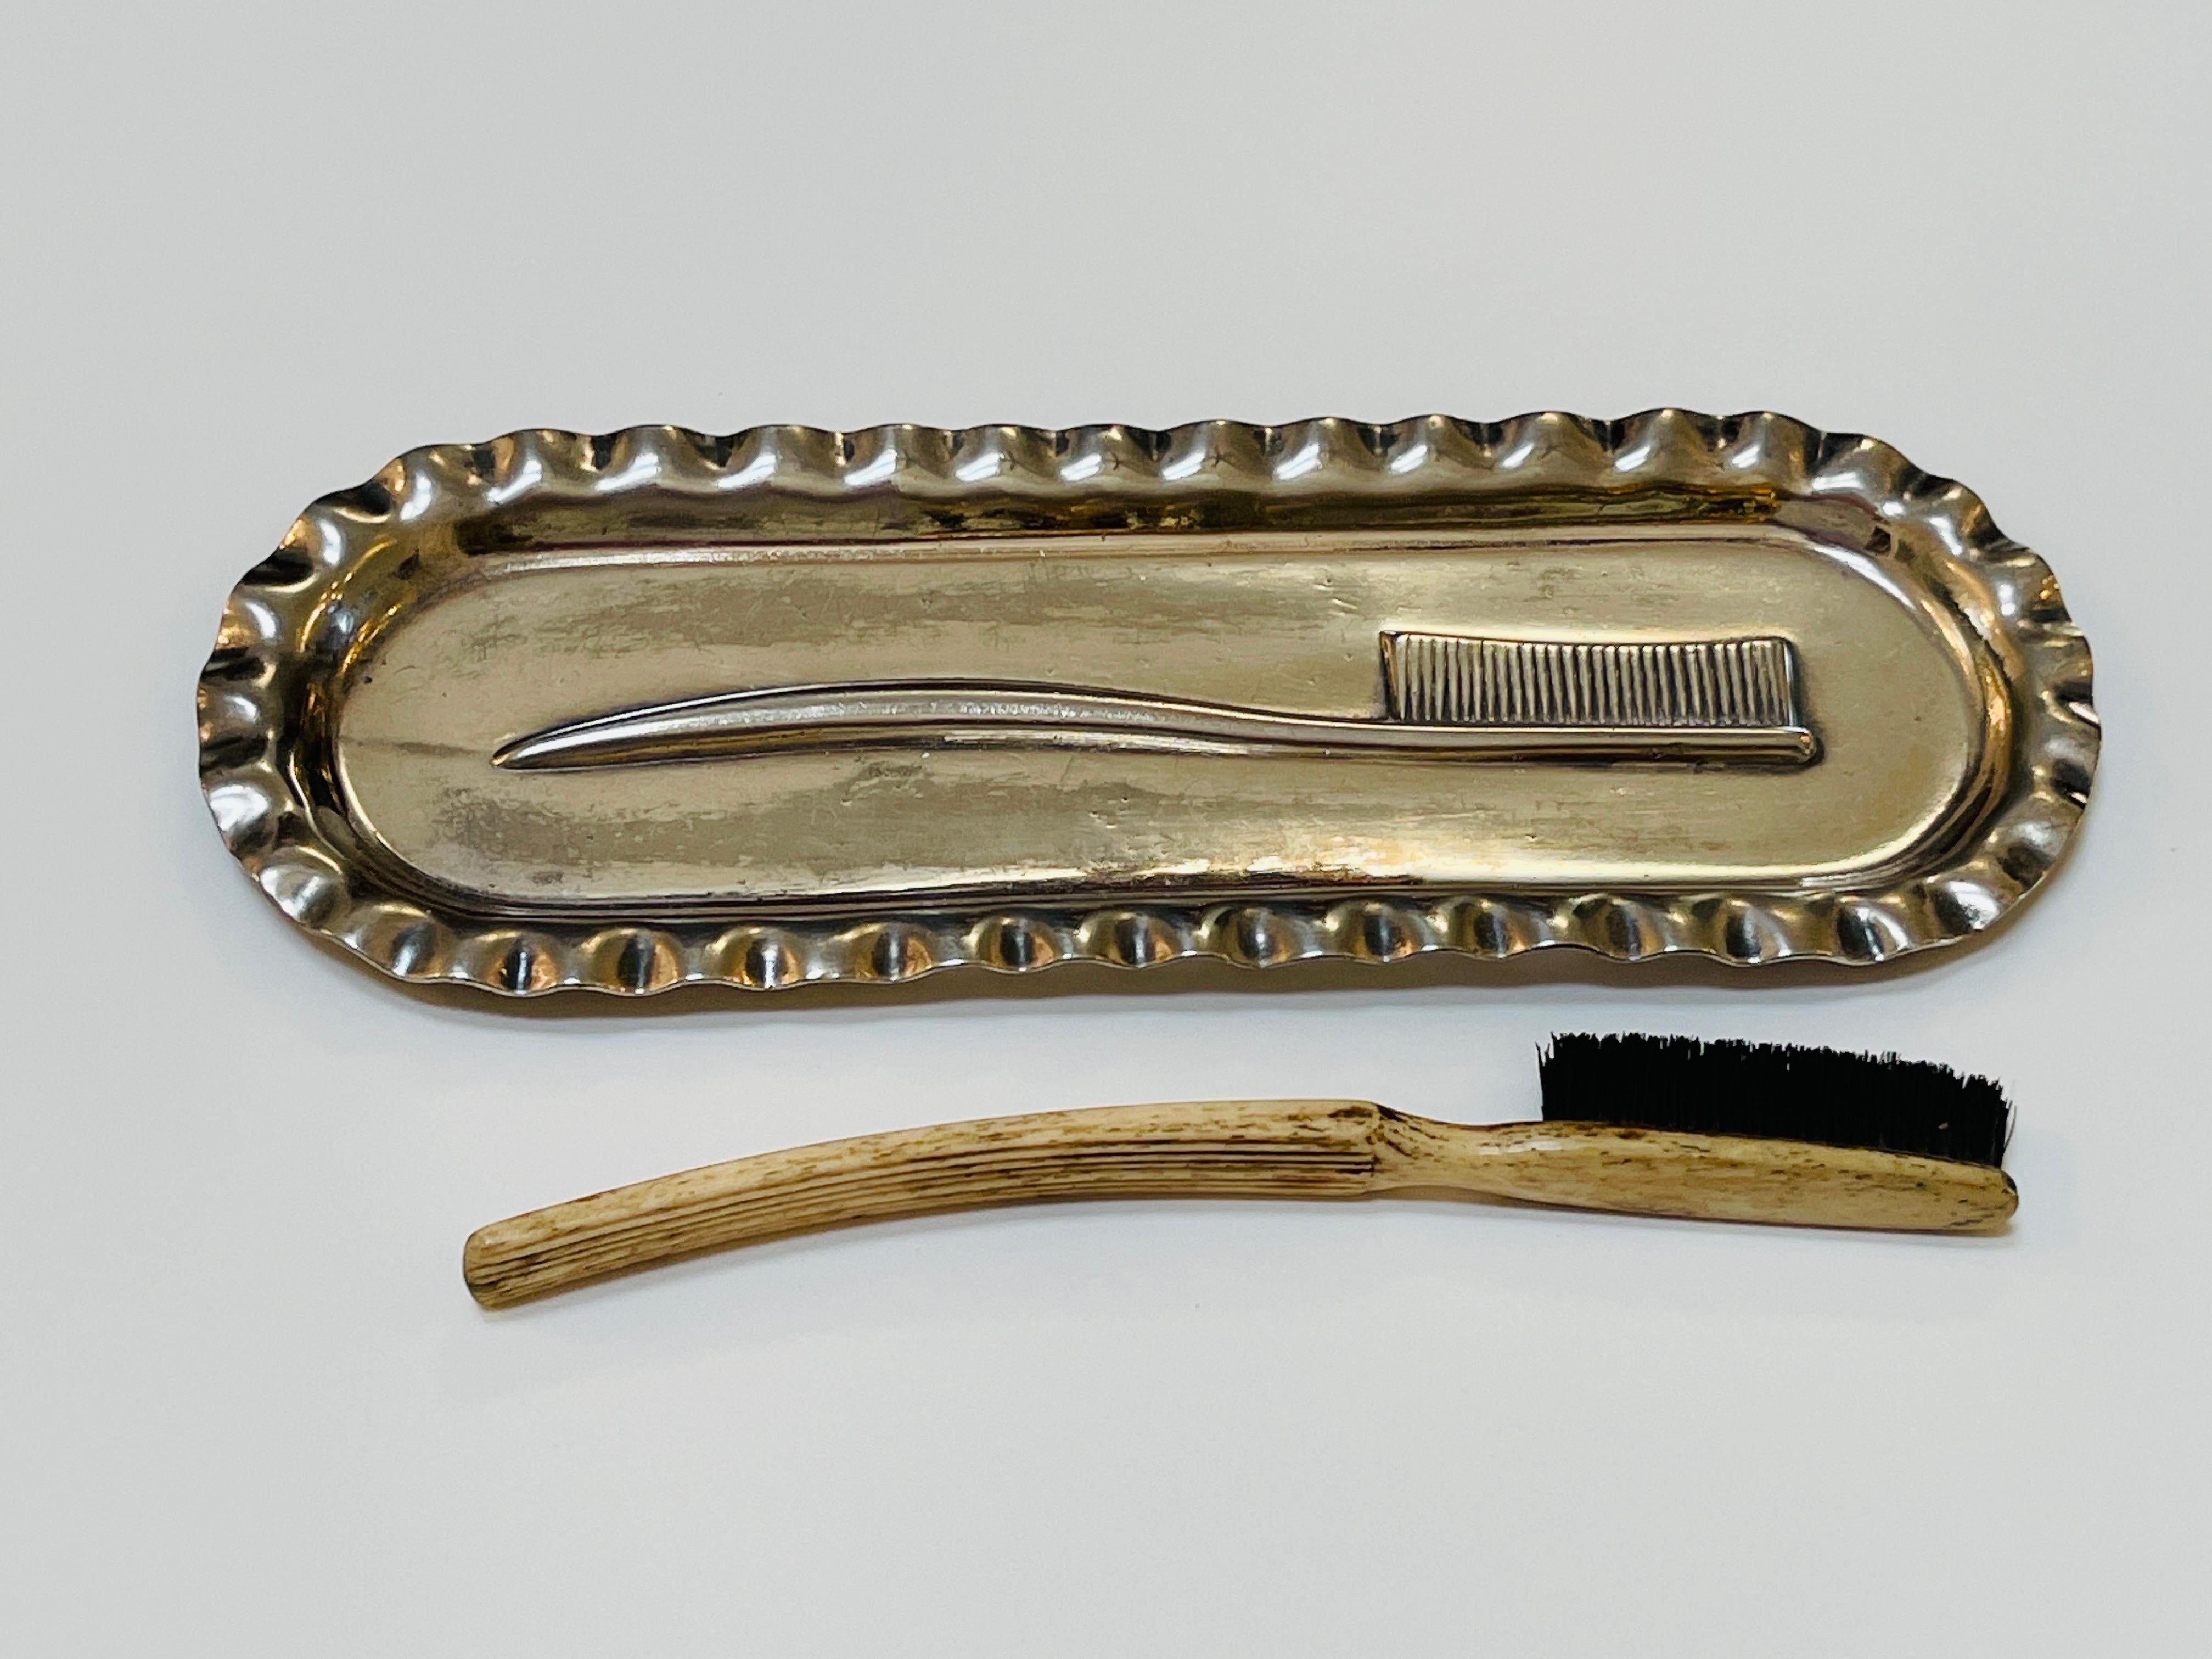 Victorian Silverplated Toothbrush Tray & Brush Set by James W. Tufts Co, Boston For Sale 6